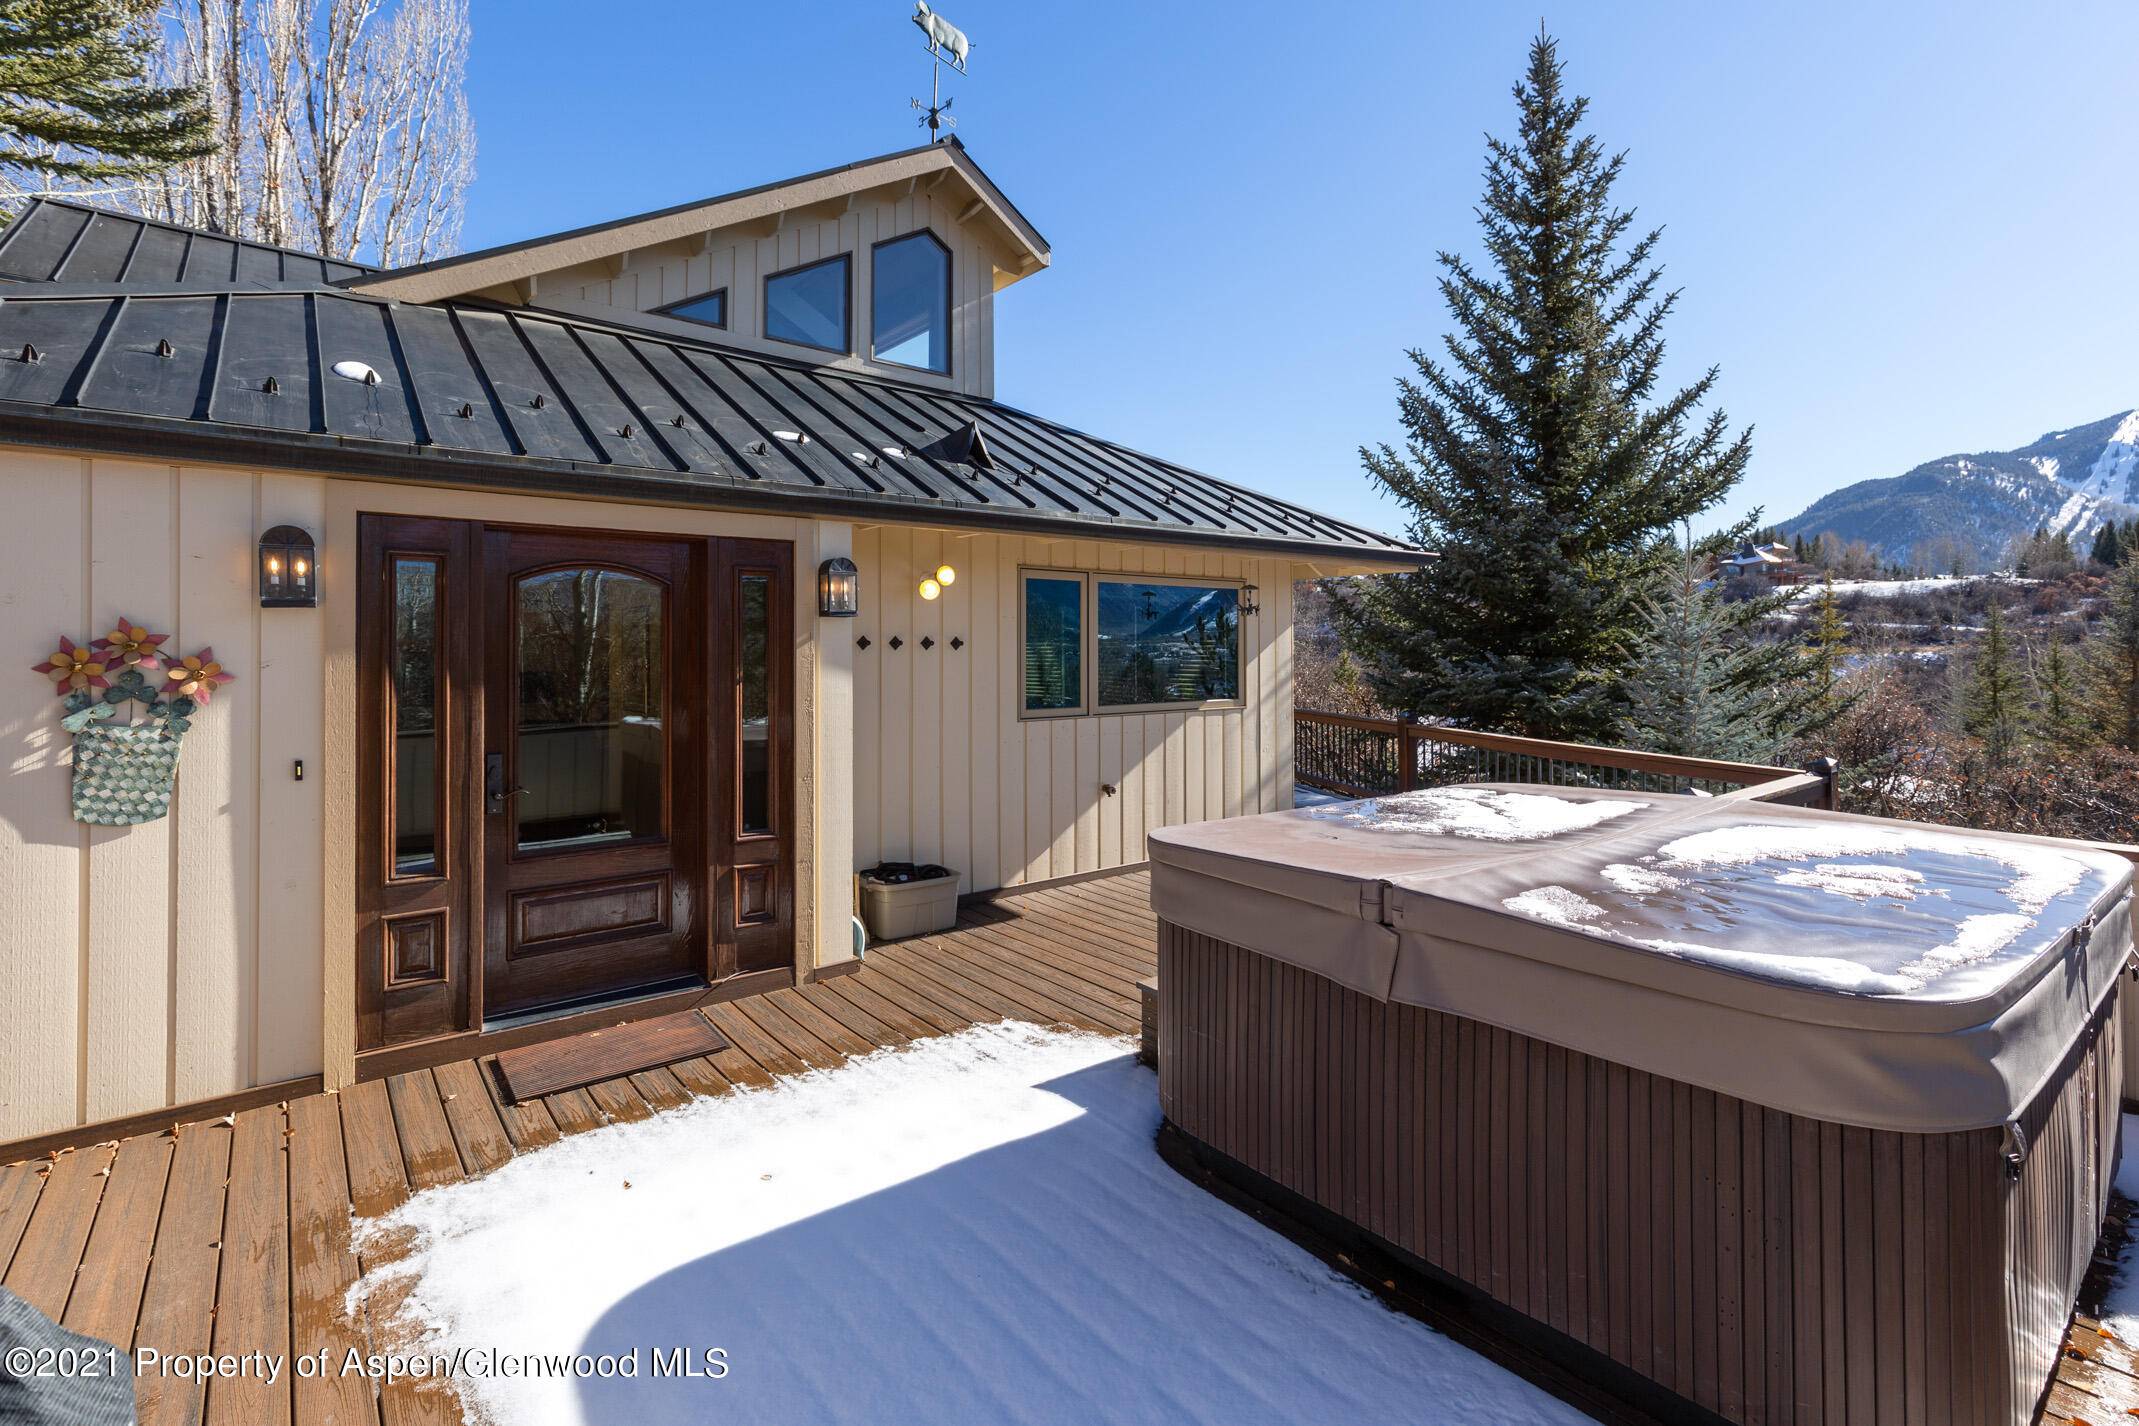 Settled on the Ridge of Red Mountain, you can relax in the hot tub while gazing at the panoramic views of Aspen Mountain, Highlands, Buttermilk and Mt.